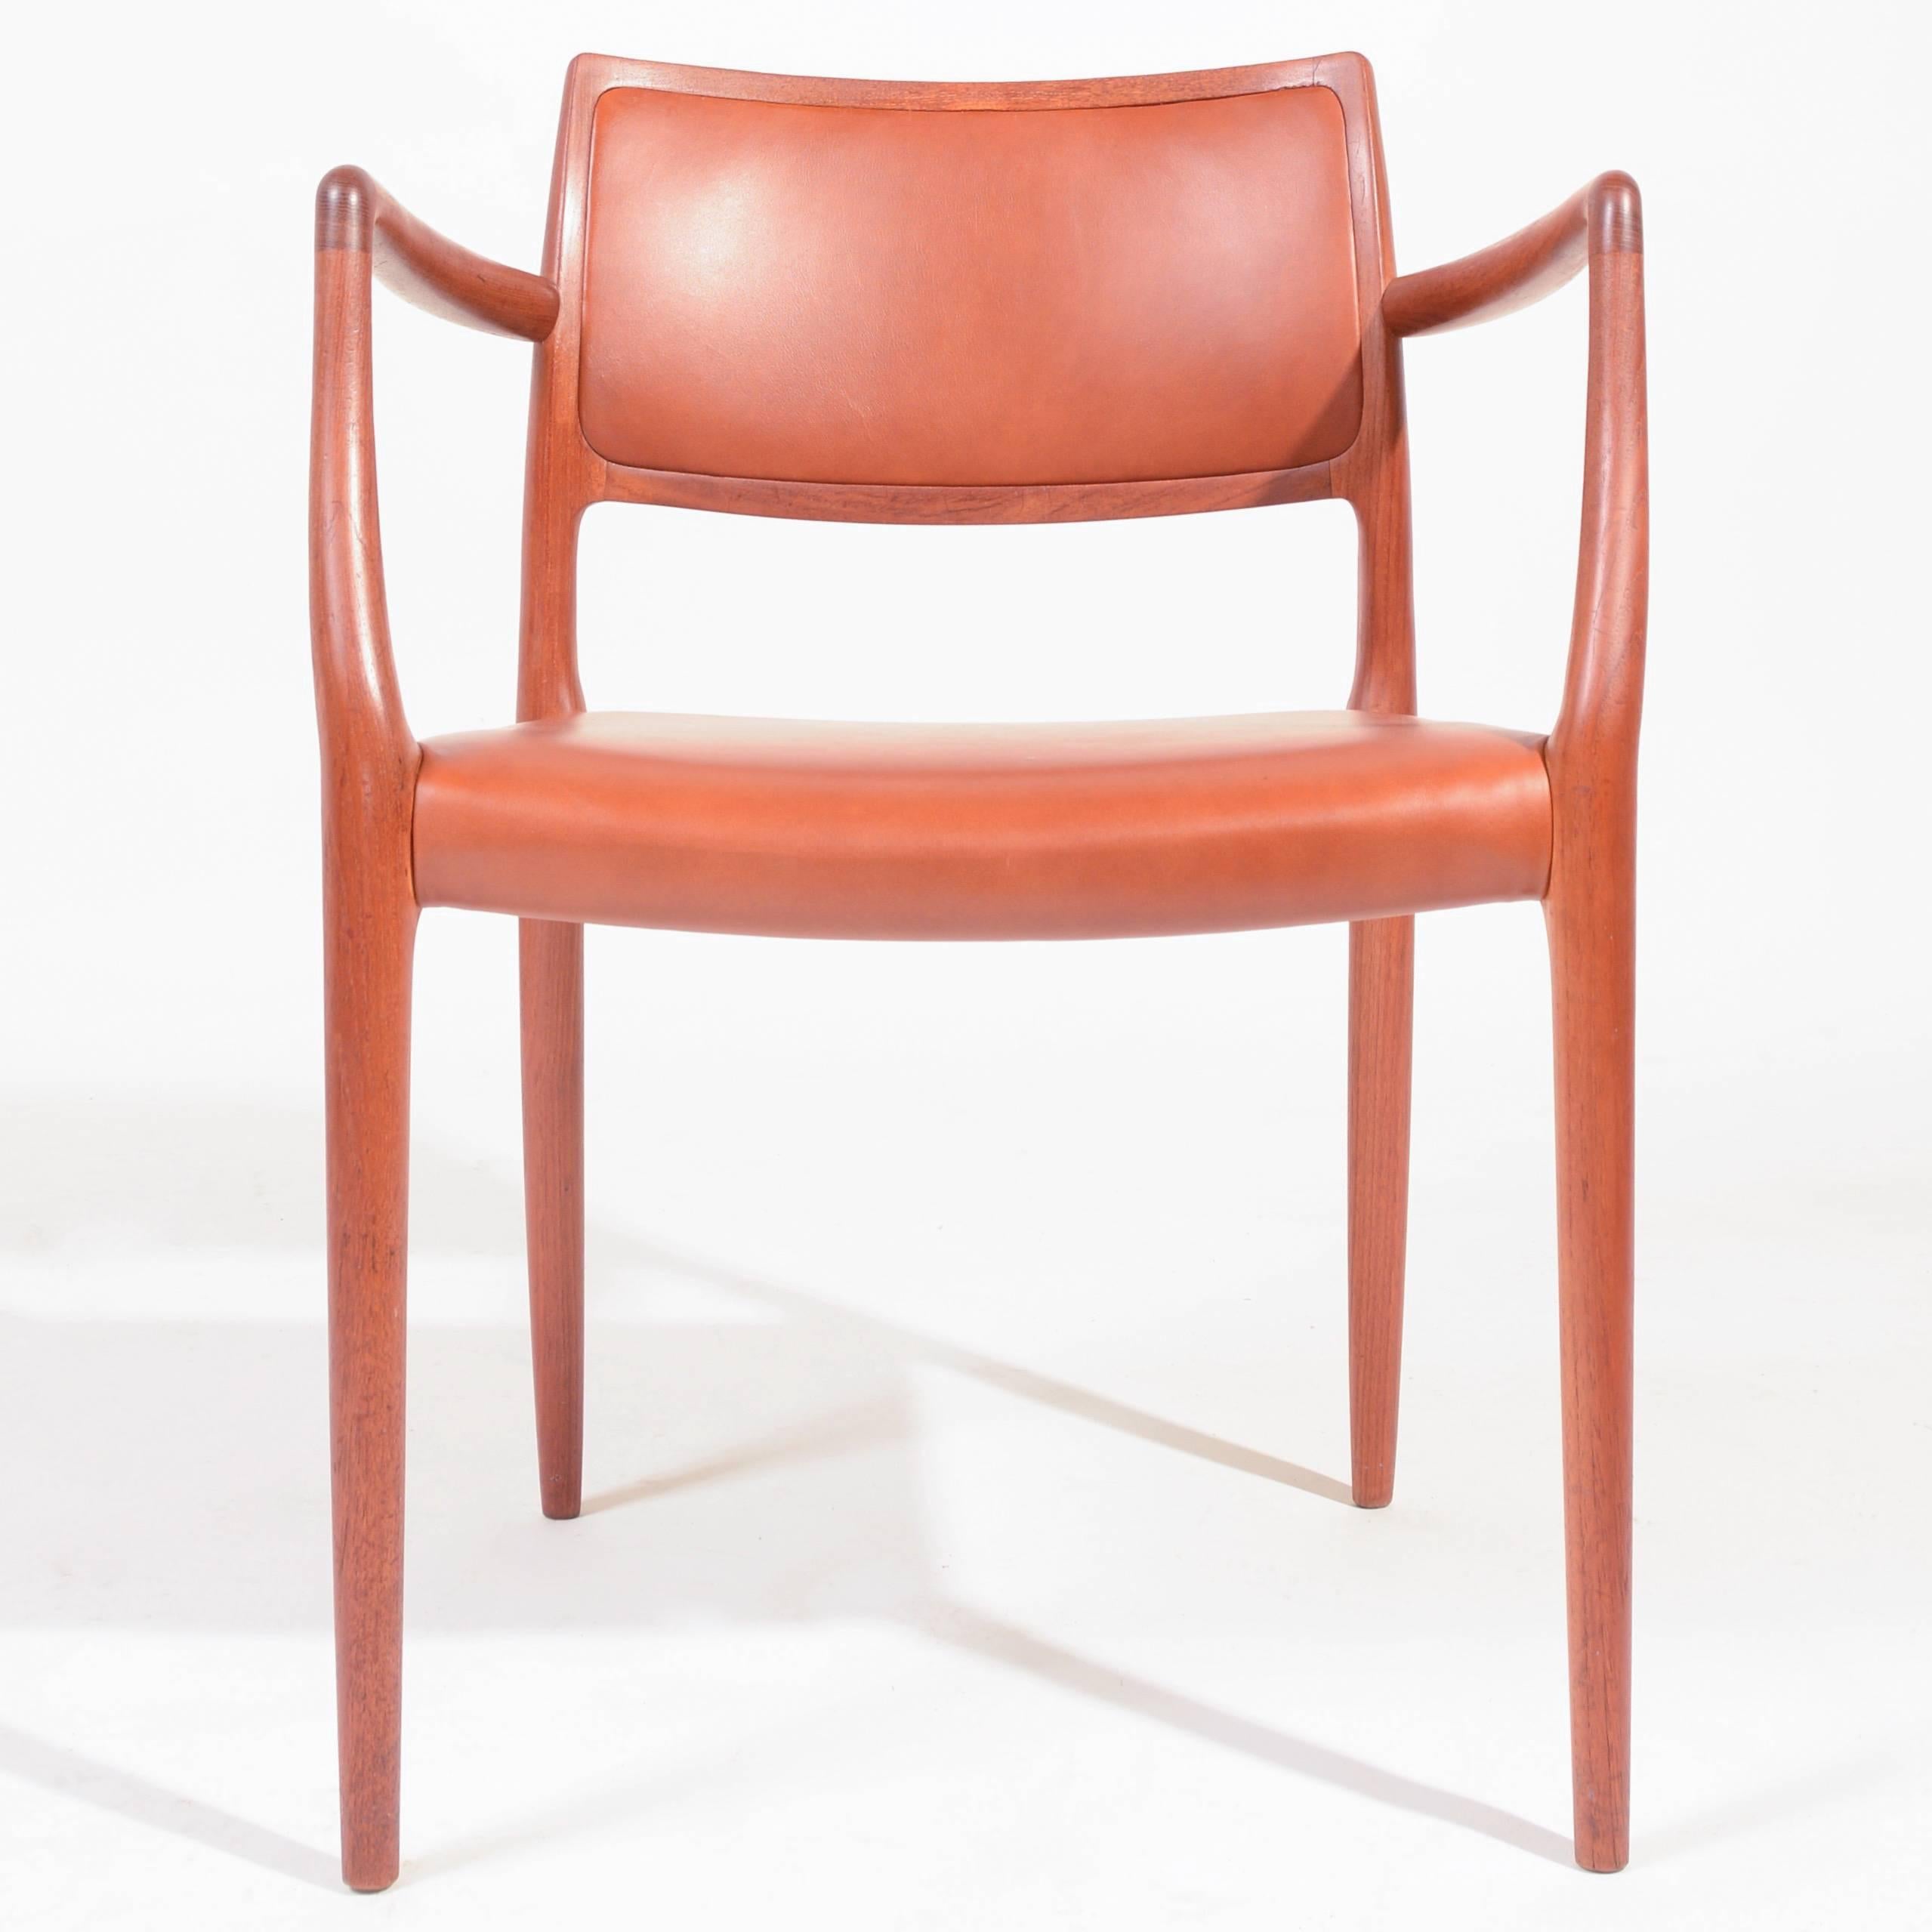 Set of four teak dining chairs designed by Niels Otto Møller for J. L. Møllers Møbelfabrik. The model 80 dates to 1968 and is an exceptional chair offering a very comfortable posture and the warm modern look typical of great danish design. Newly